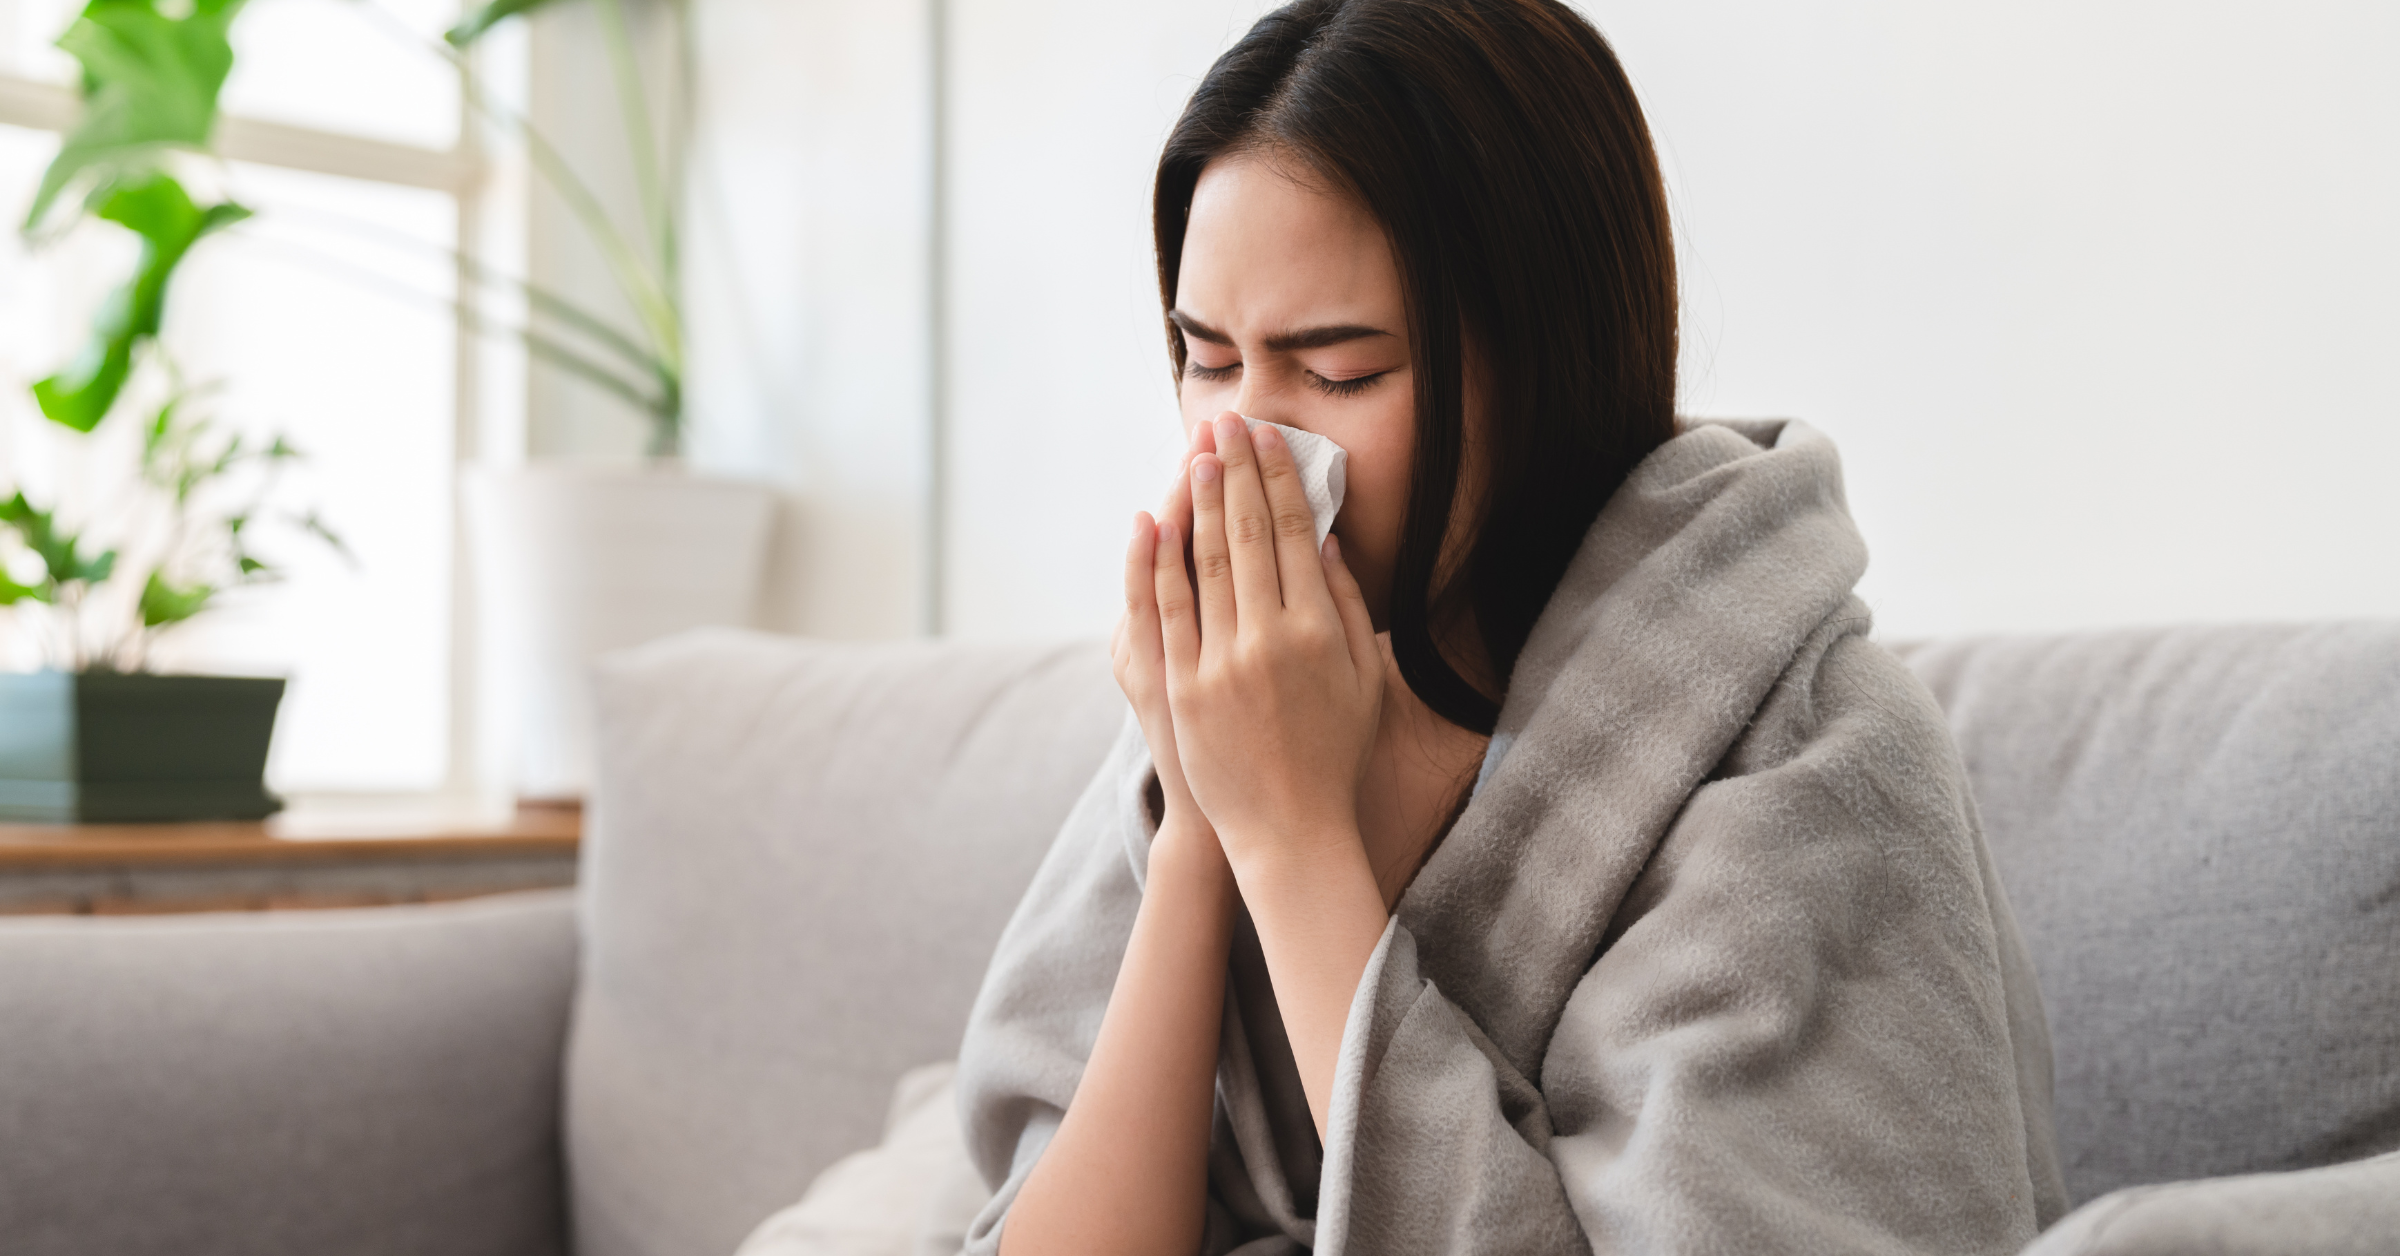 Learn how to boost your immune system for the cold and flu season